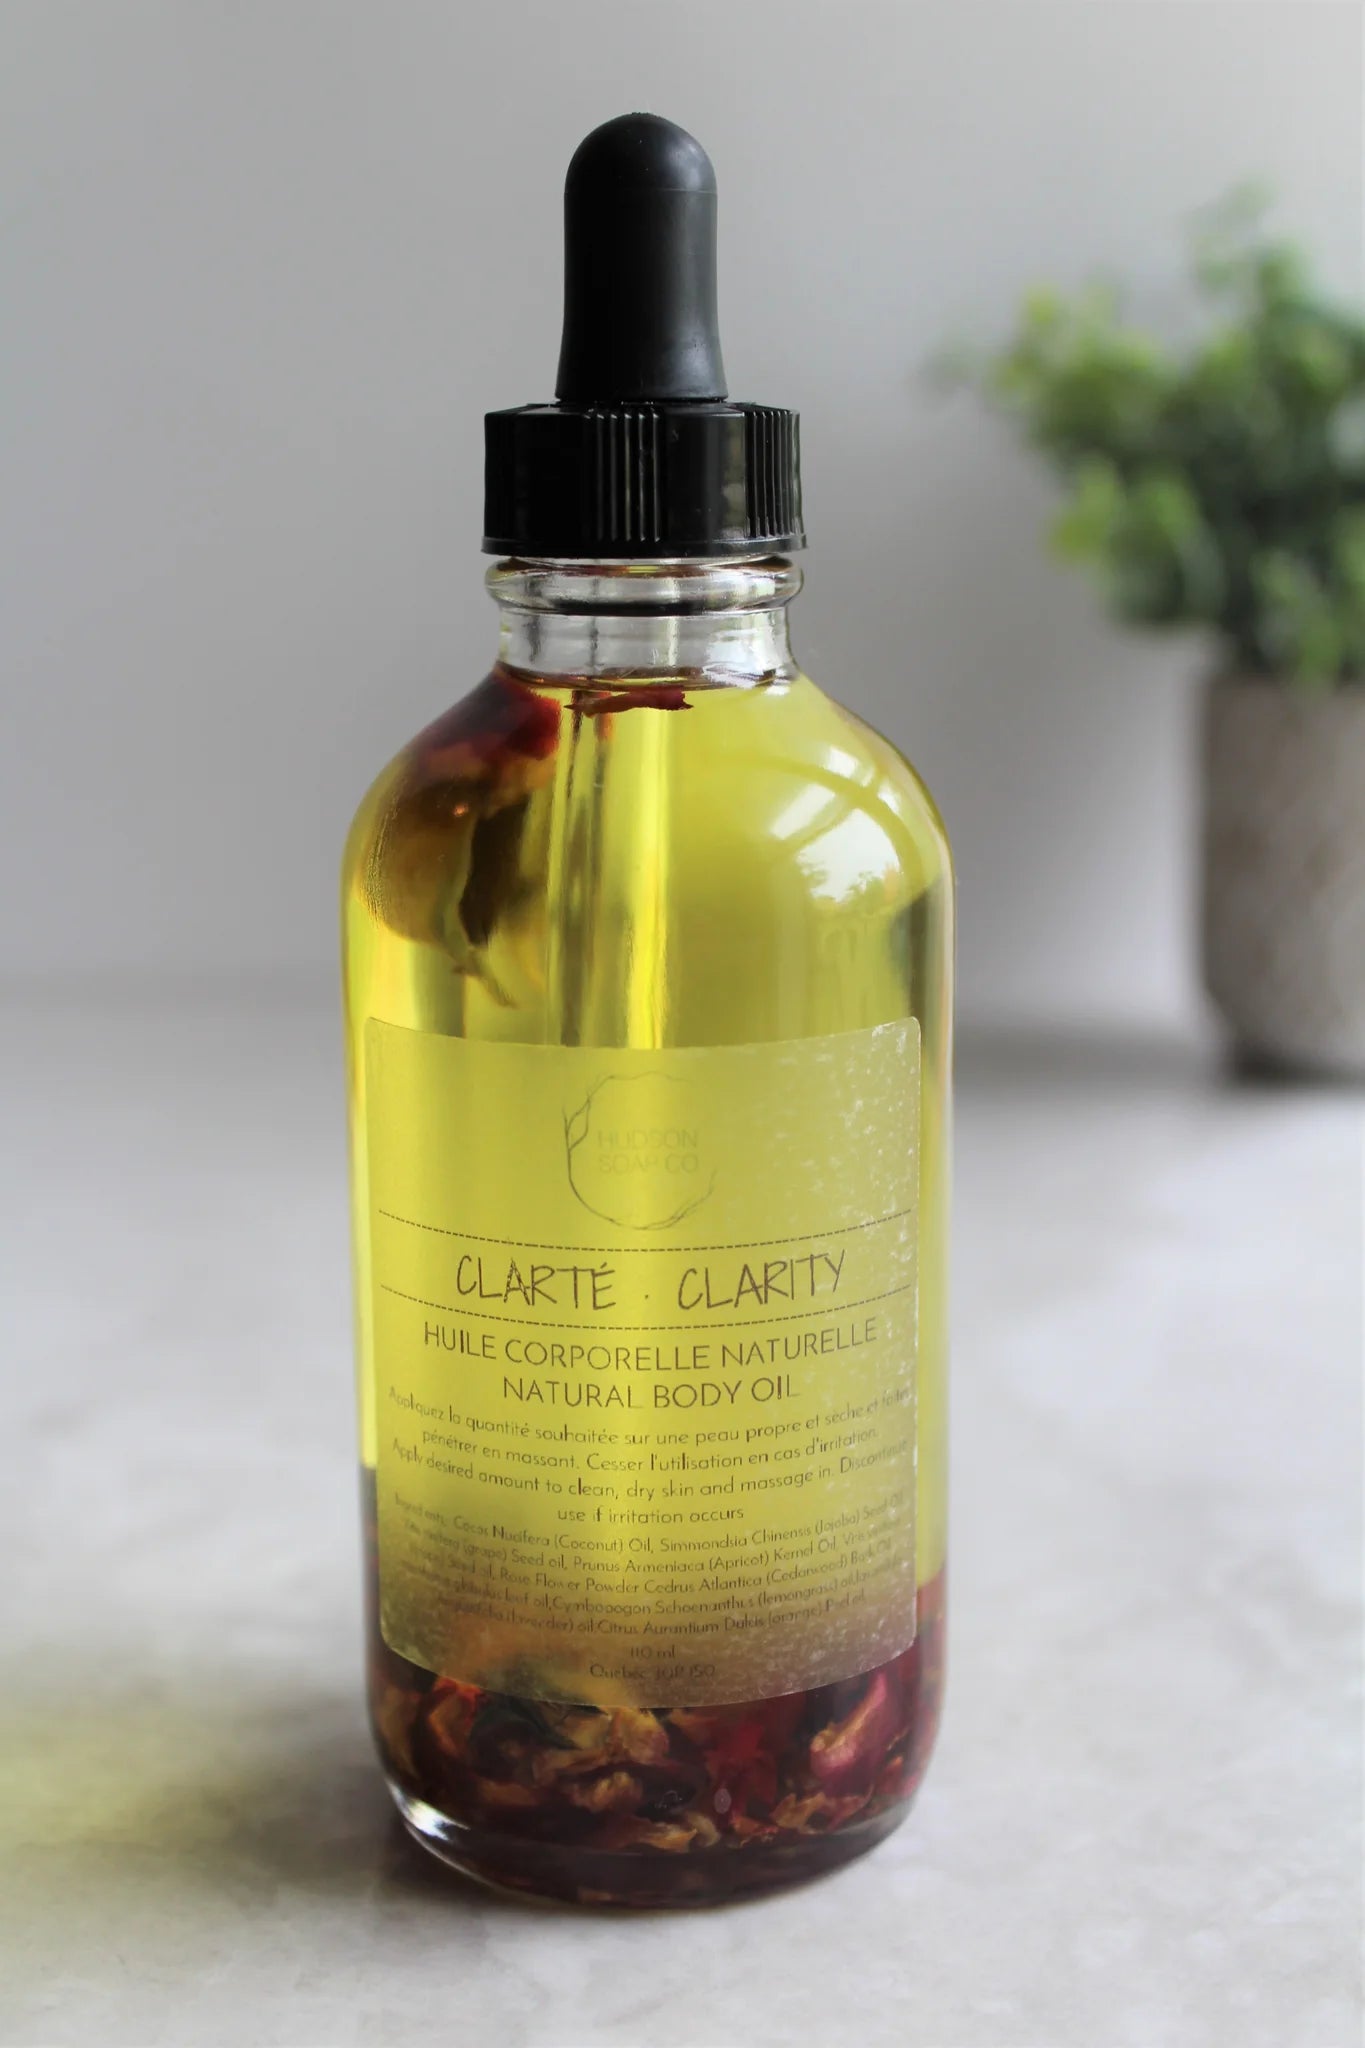 Bottle of natural body oil with red flowers suspended in the oil "Clarity" with a plant off focus in background